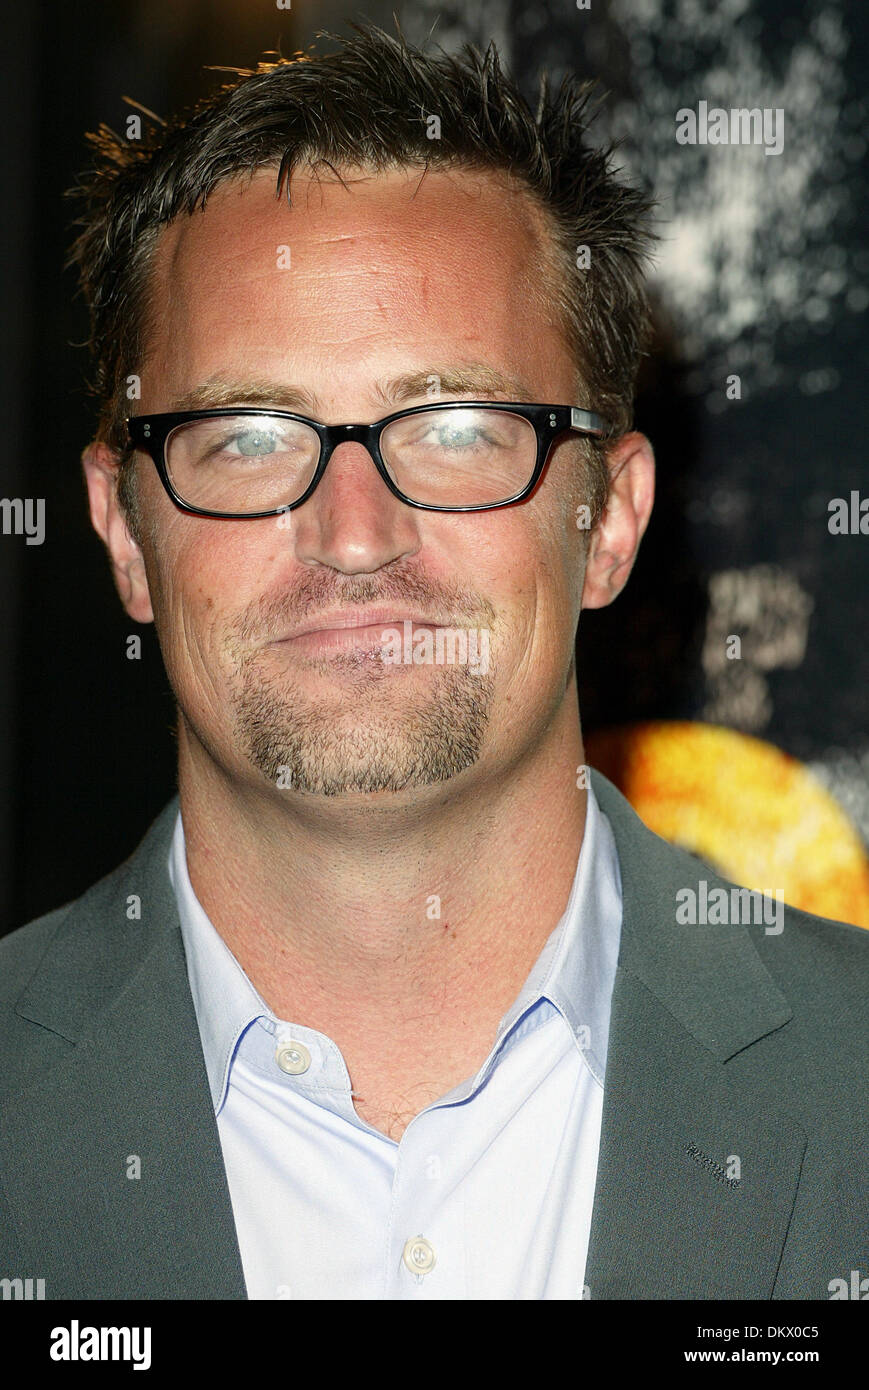 MATTHEW PERRY.ACTOR.WESTWOOD, LOS ANGELES, USA.06/11/2002.LAC10672. Stock Photo